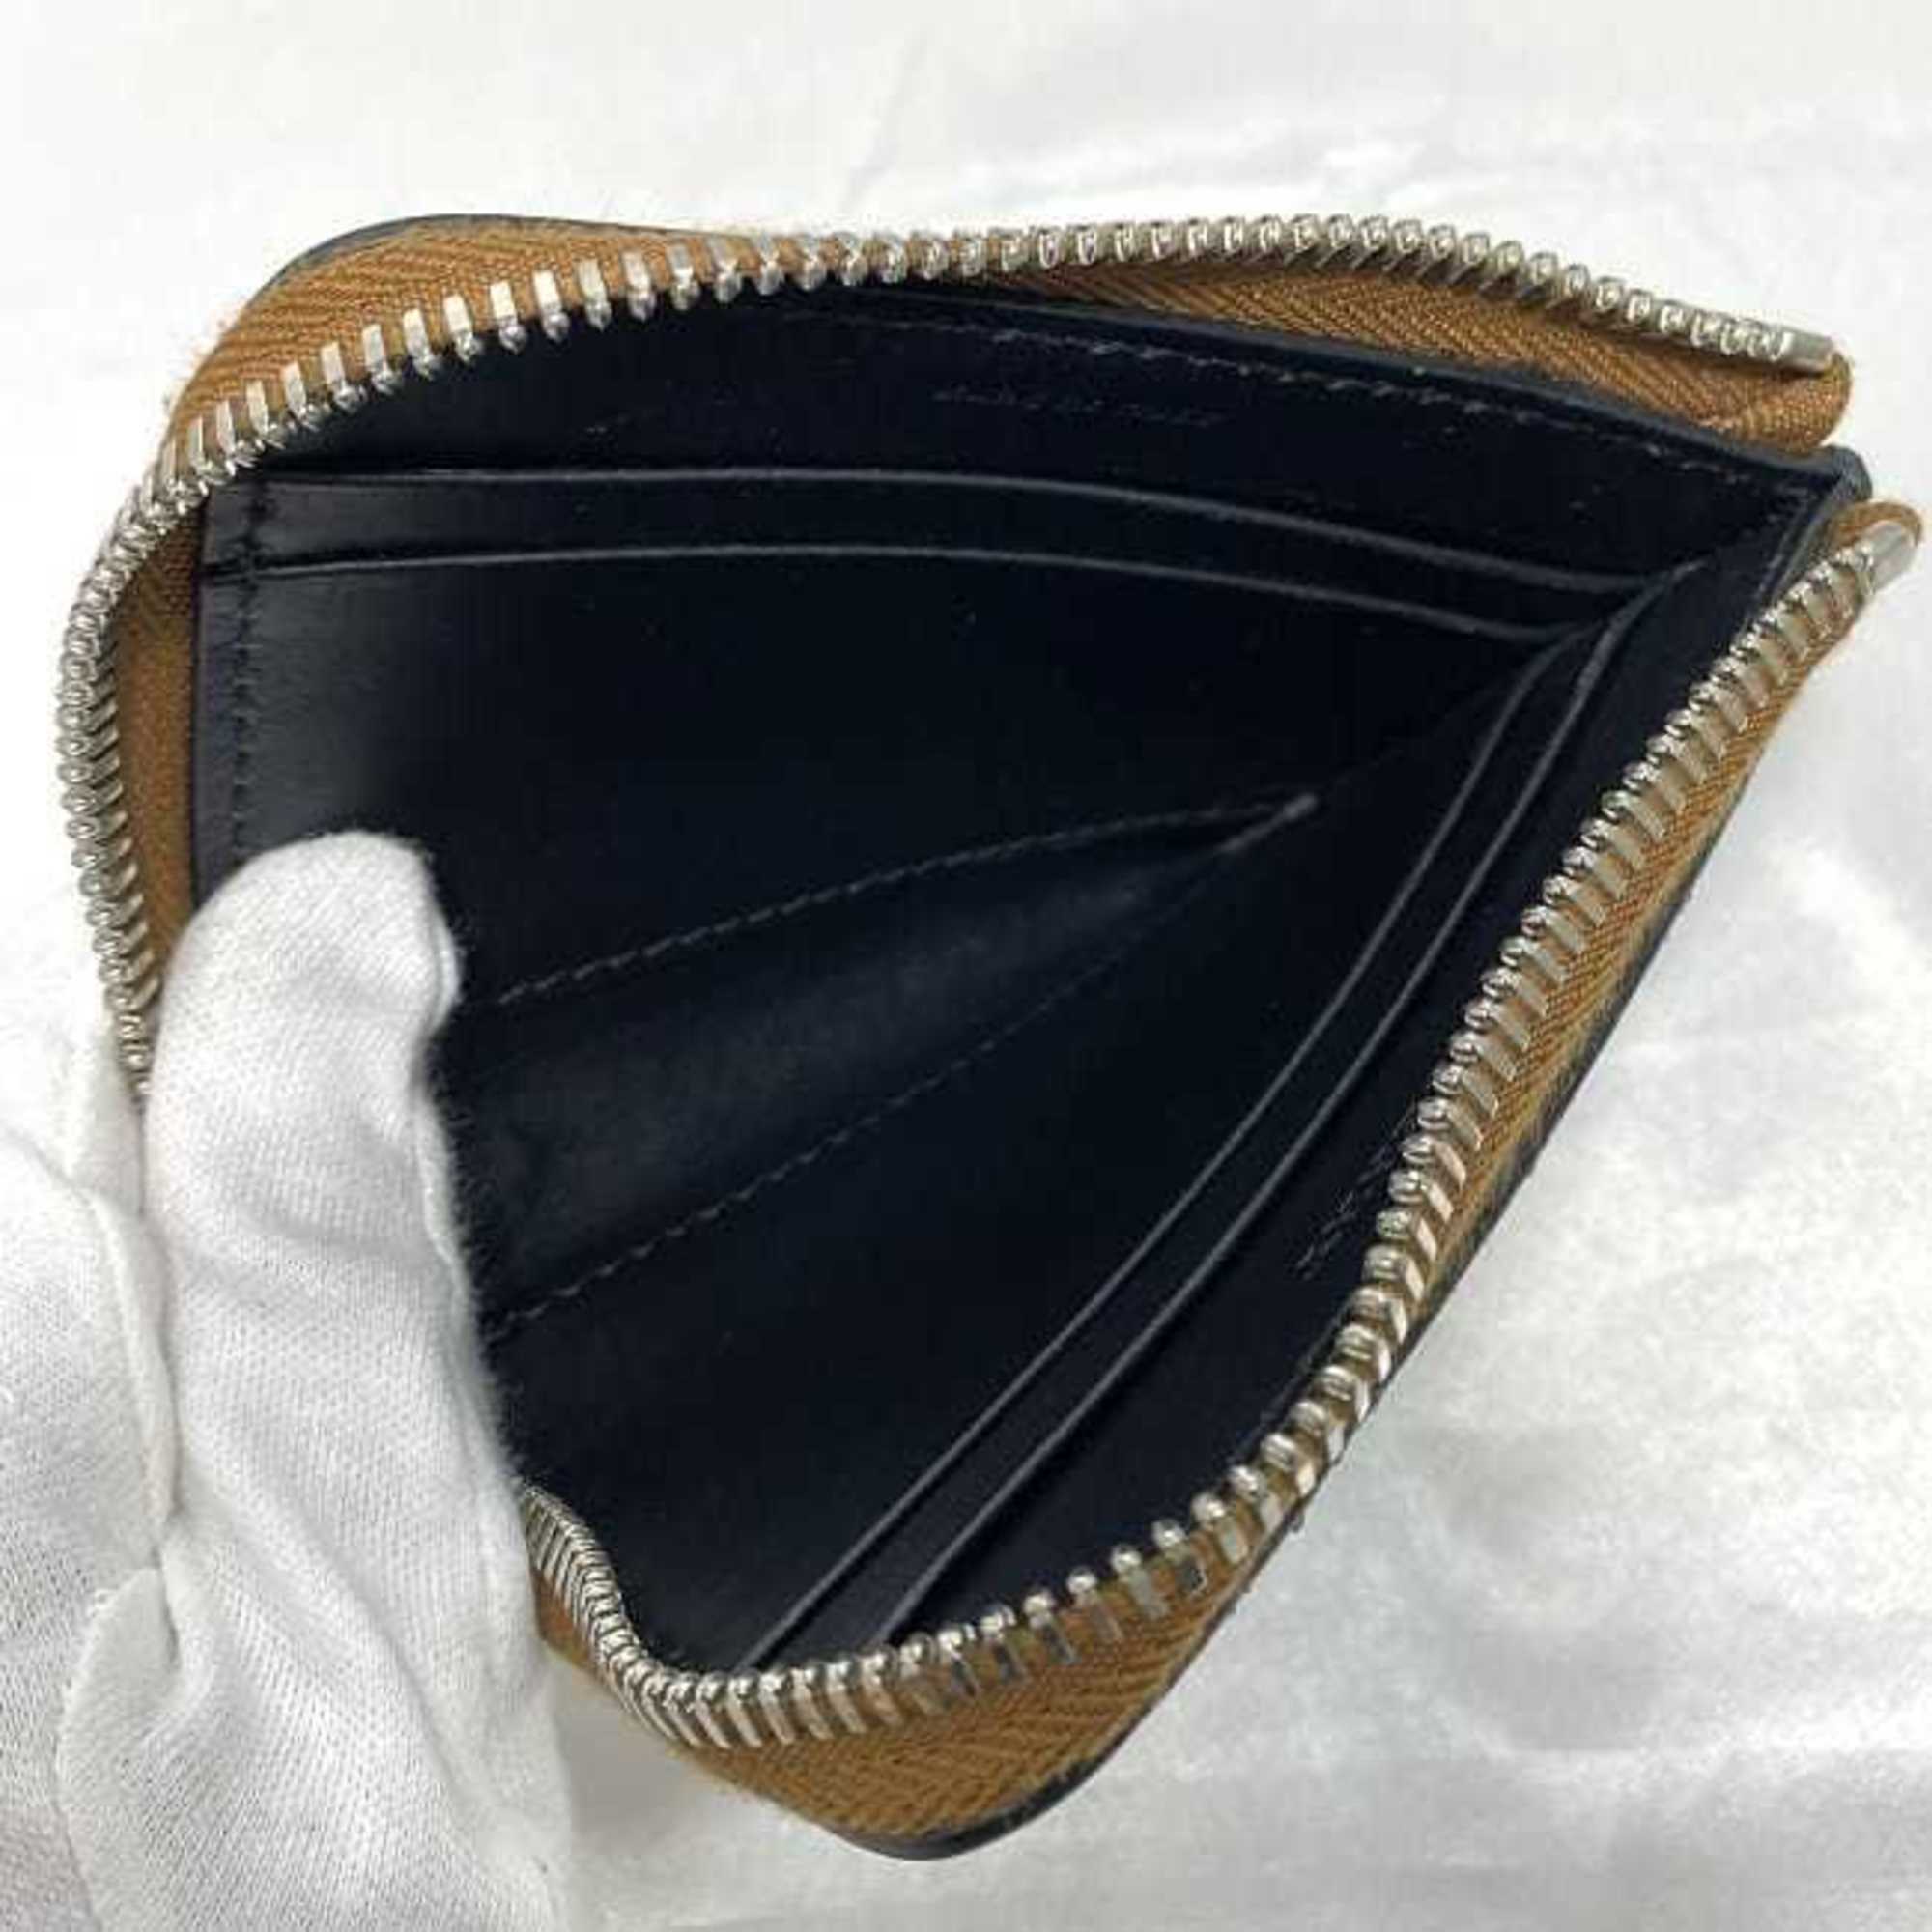 Burberry L-shaped coin case black brown wallet purse leather BURBERRY pull compact men's